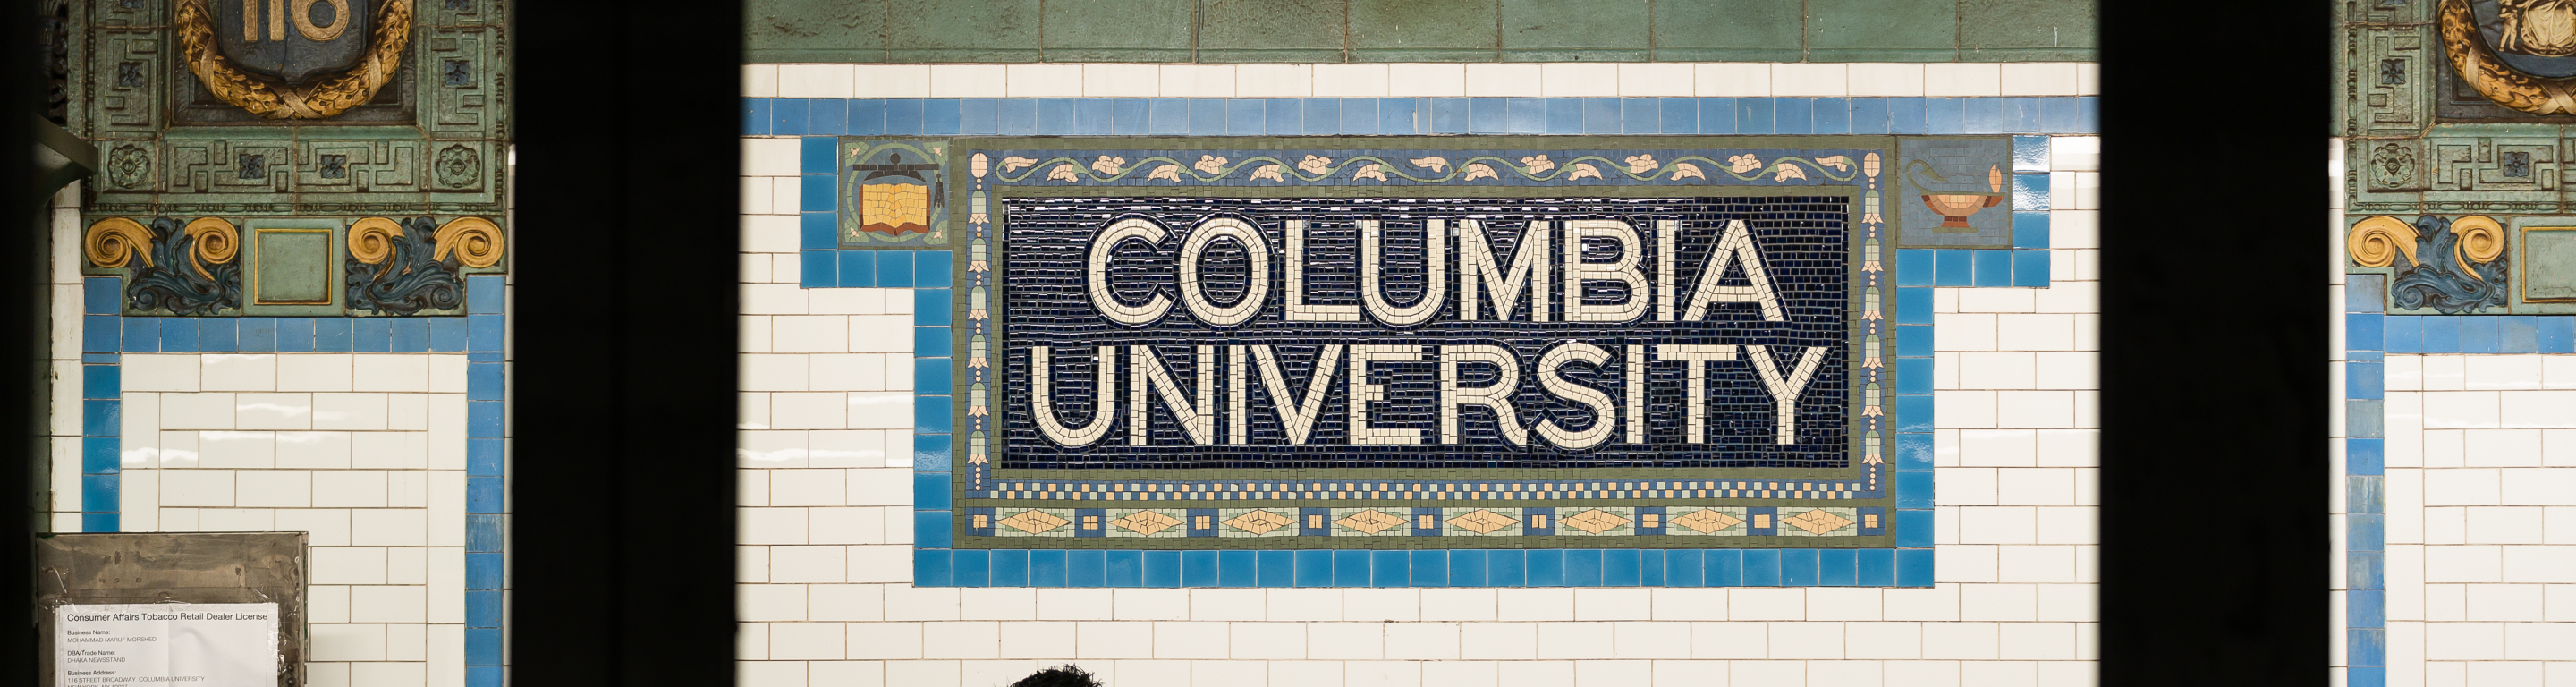 Columbia subway station interior with students